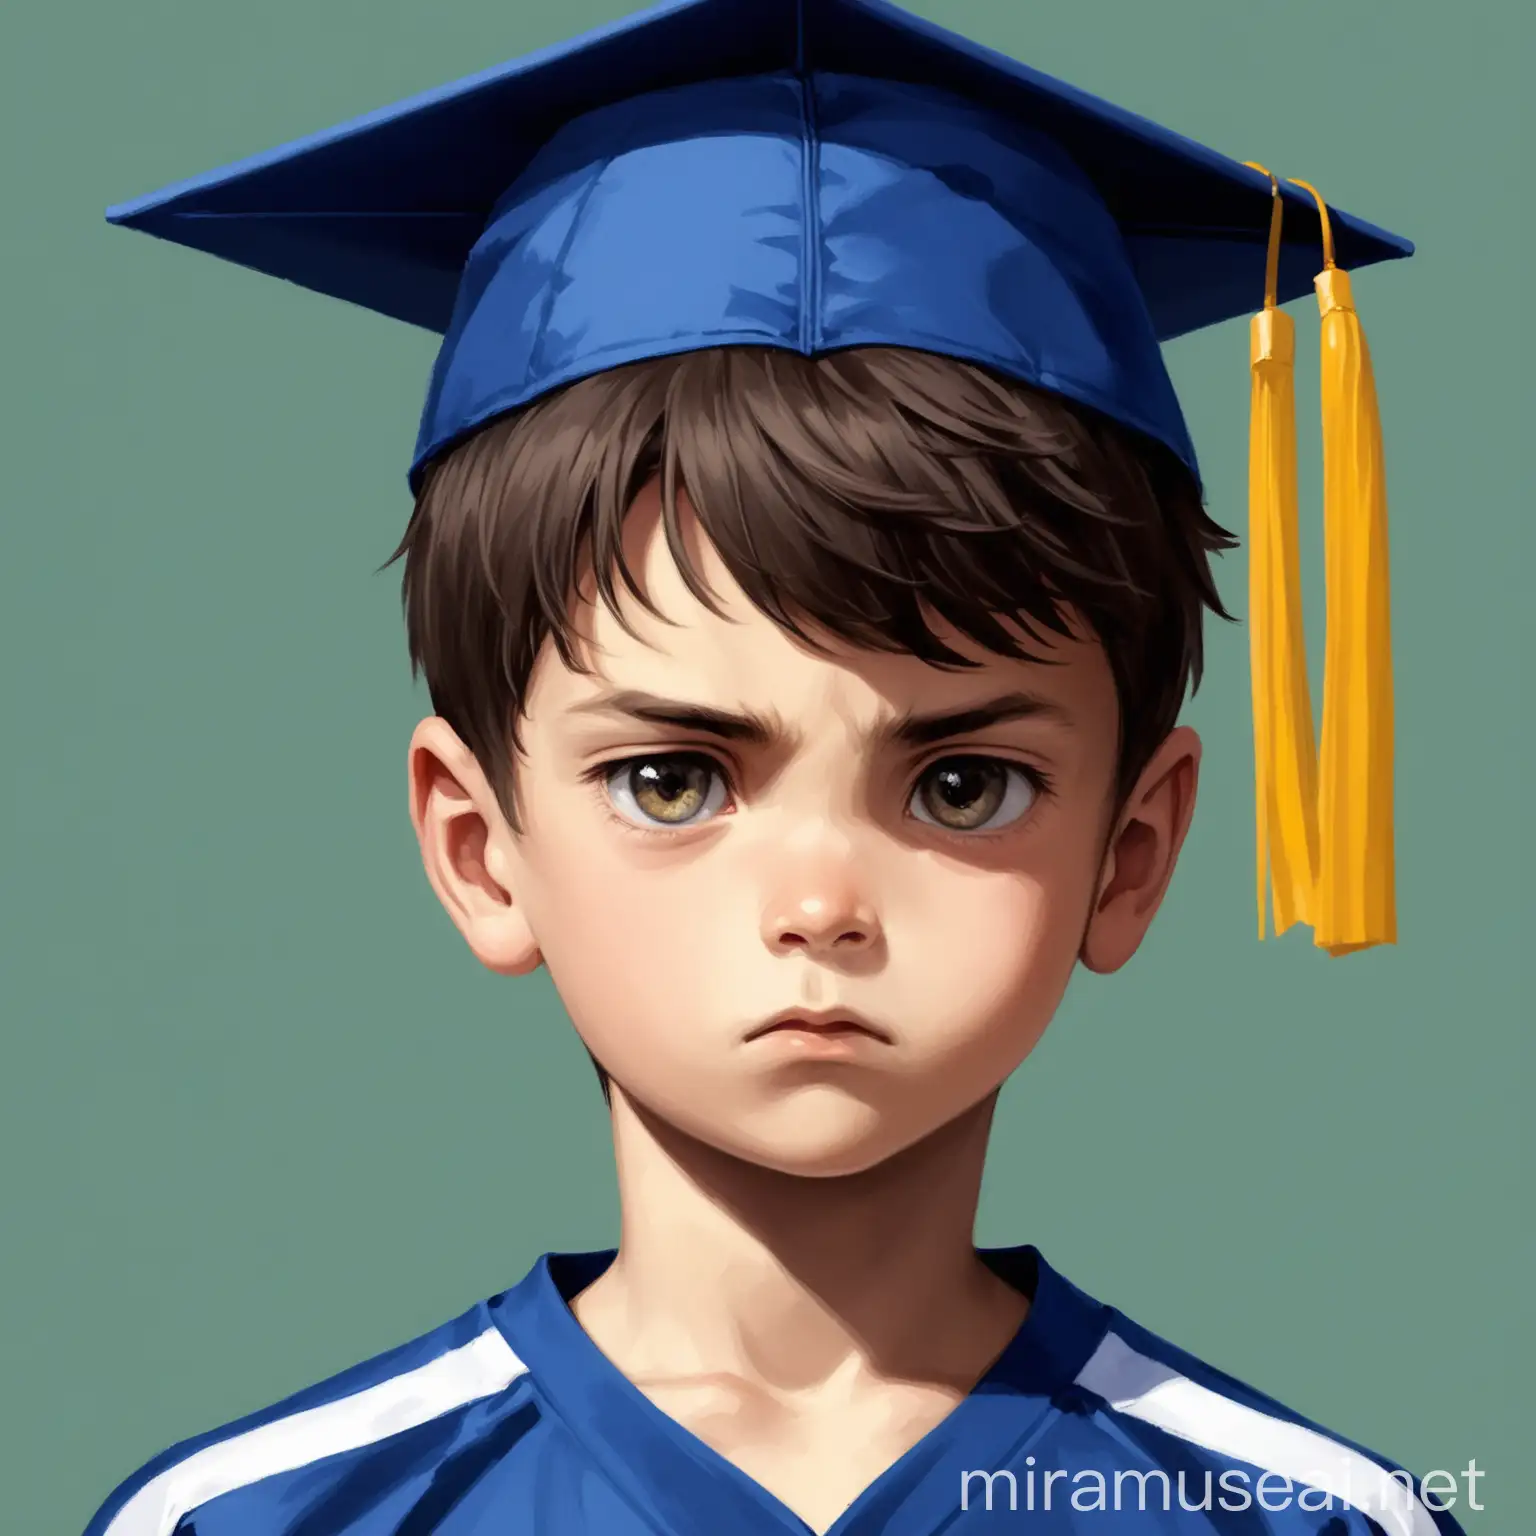 Determined Young Boy in Graduation Cap or Sports Uniform